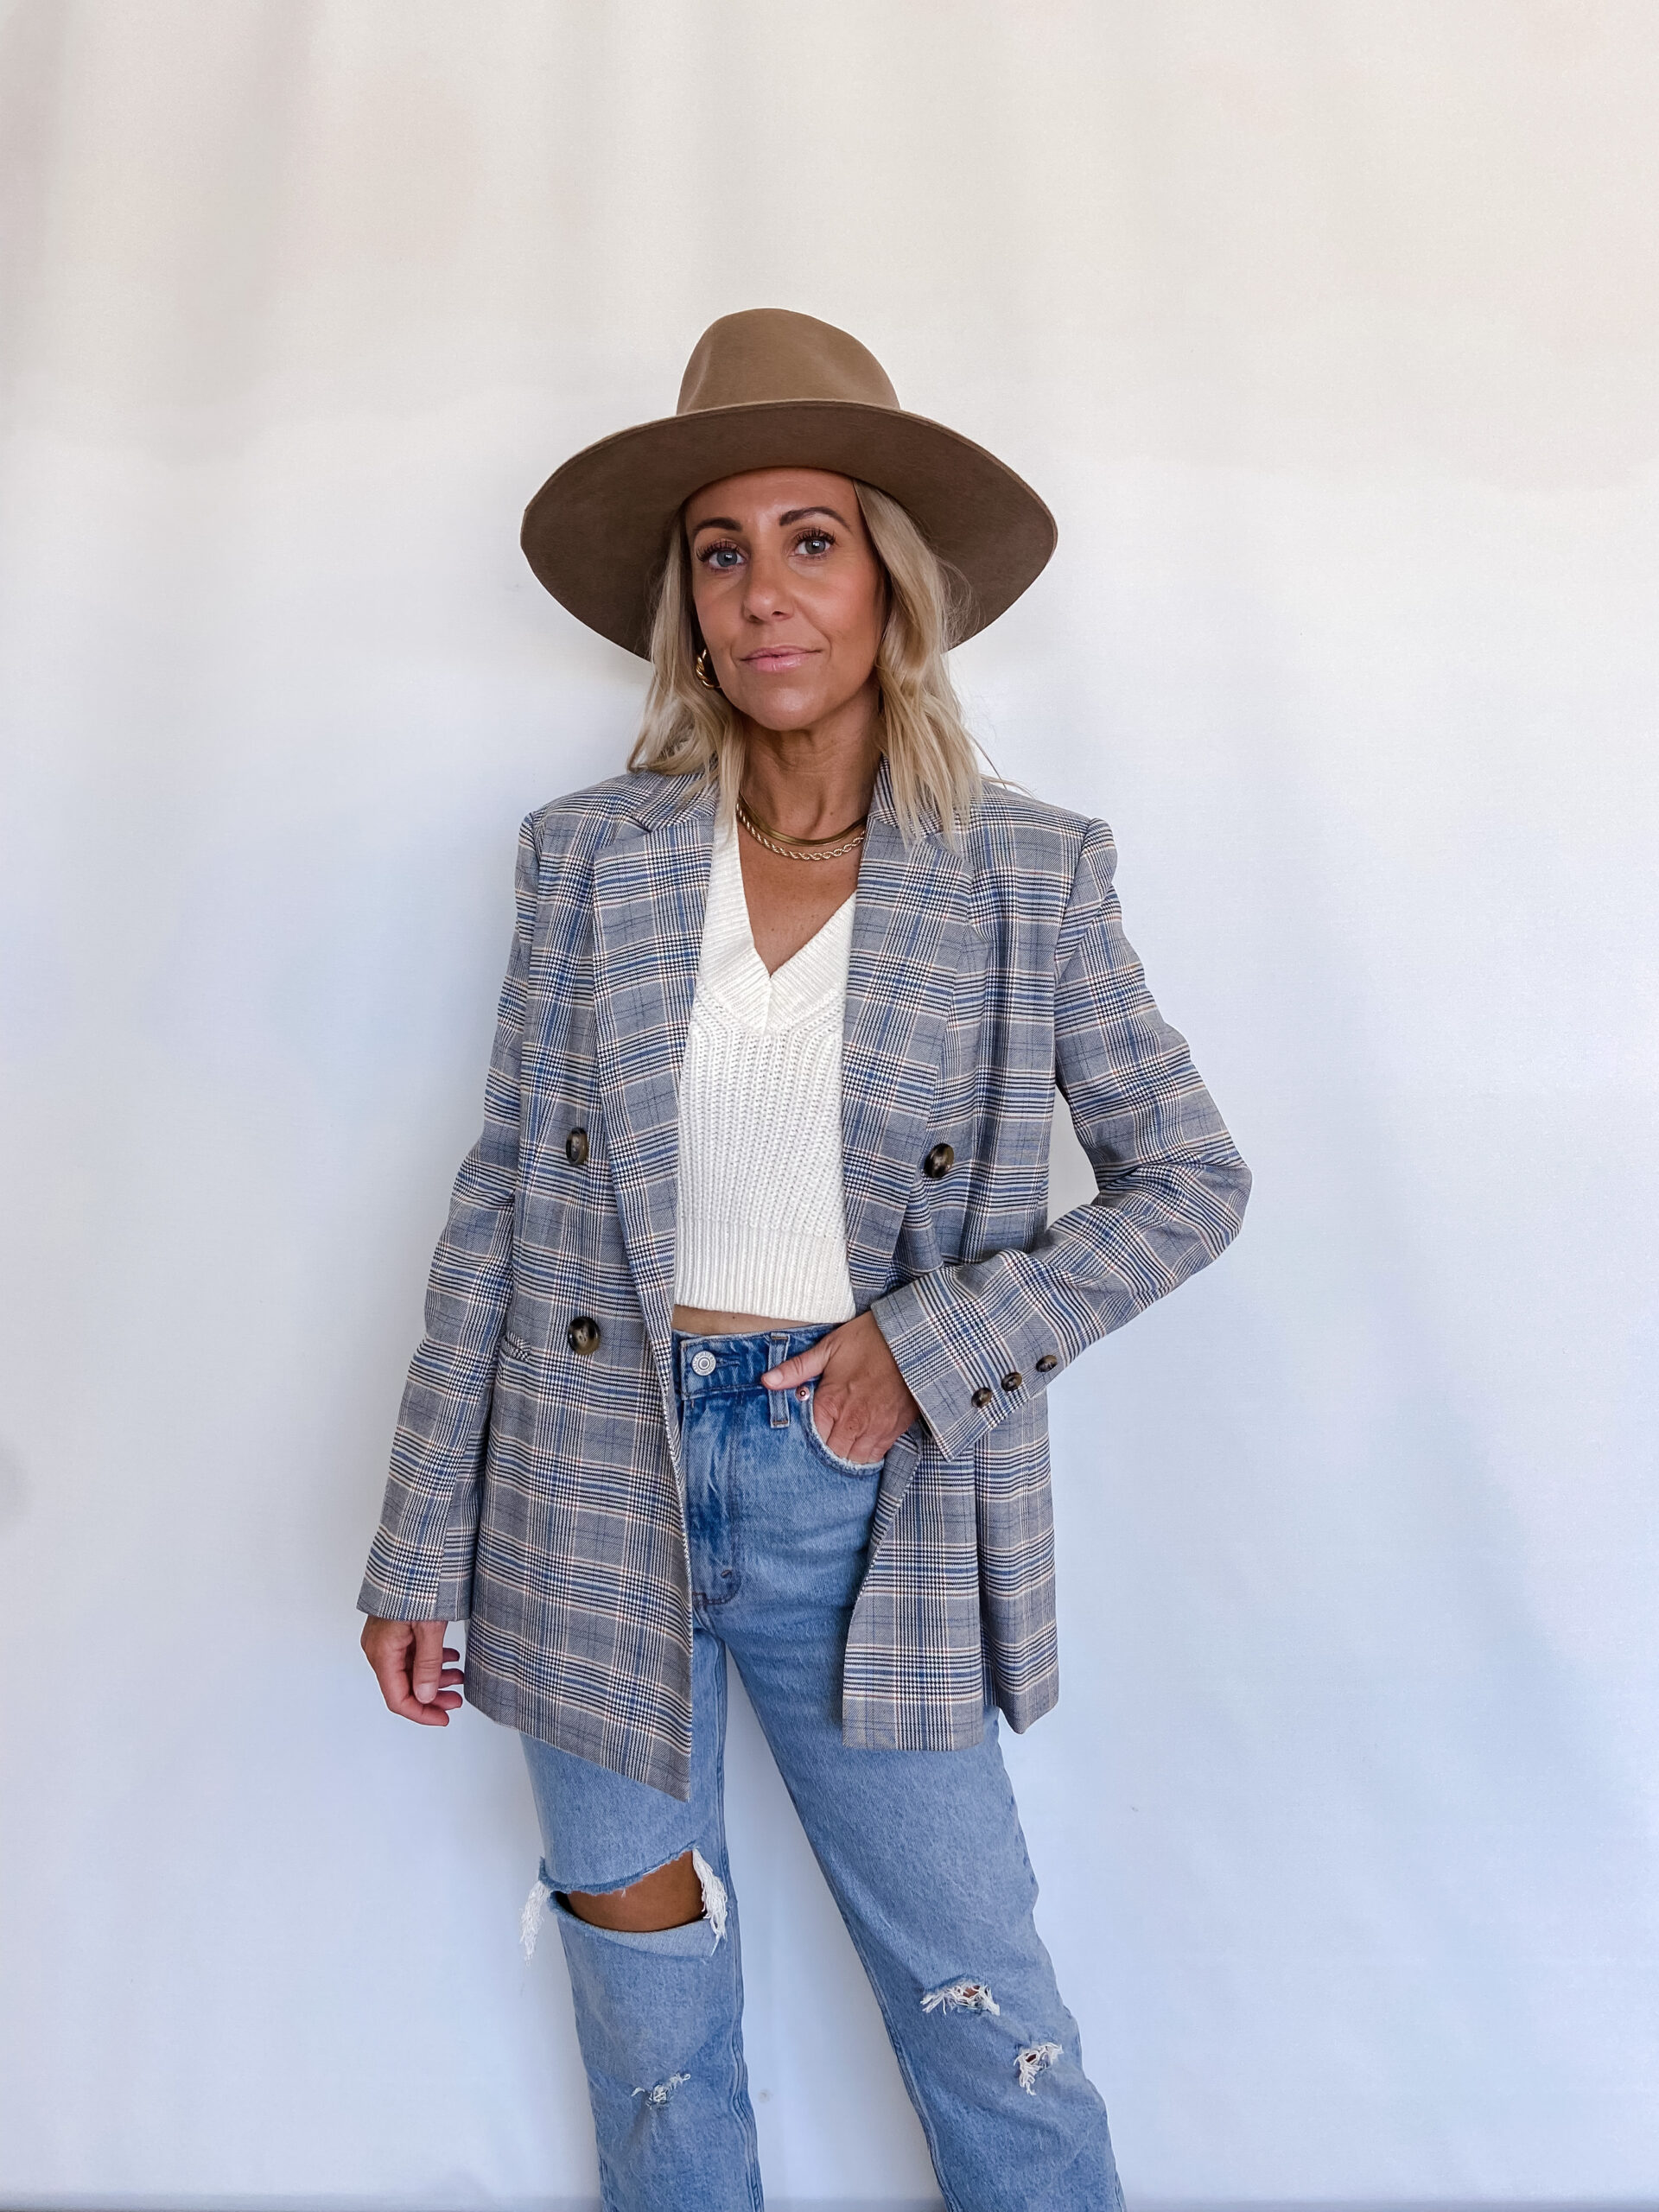 Mavi Riot-Jaclyn De Leon Style. Launching my own clothing line. The Mavi Riot girl is boho chic with a little bit of edge. The Riot blazer can be worn on any occasion. Dressy or casual.